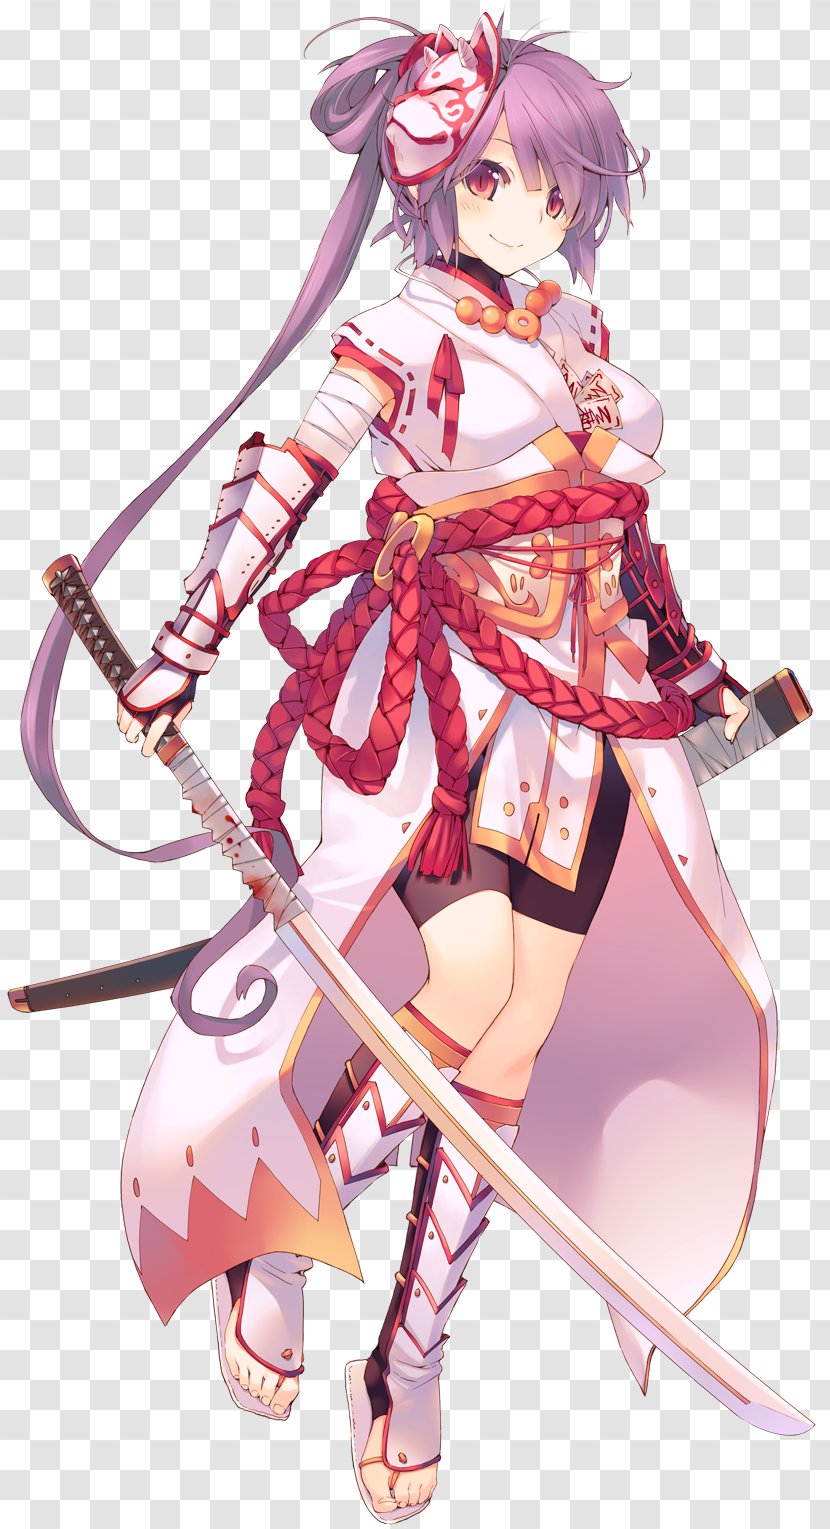 Dungeon Travelers 2 To Heart 2: ダンジョントラベラーズ2-2 闇堕ちの乙女とはじまりの書 Role-playing Game Crawl - Watercolor Transparent PNG